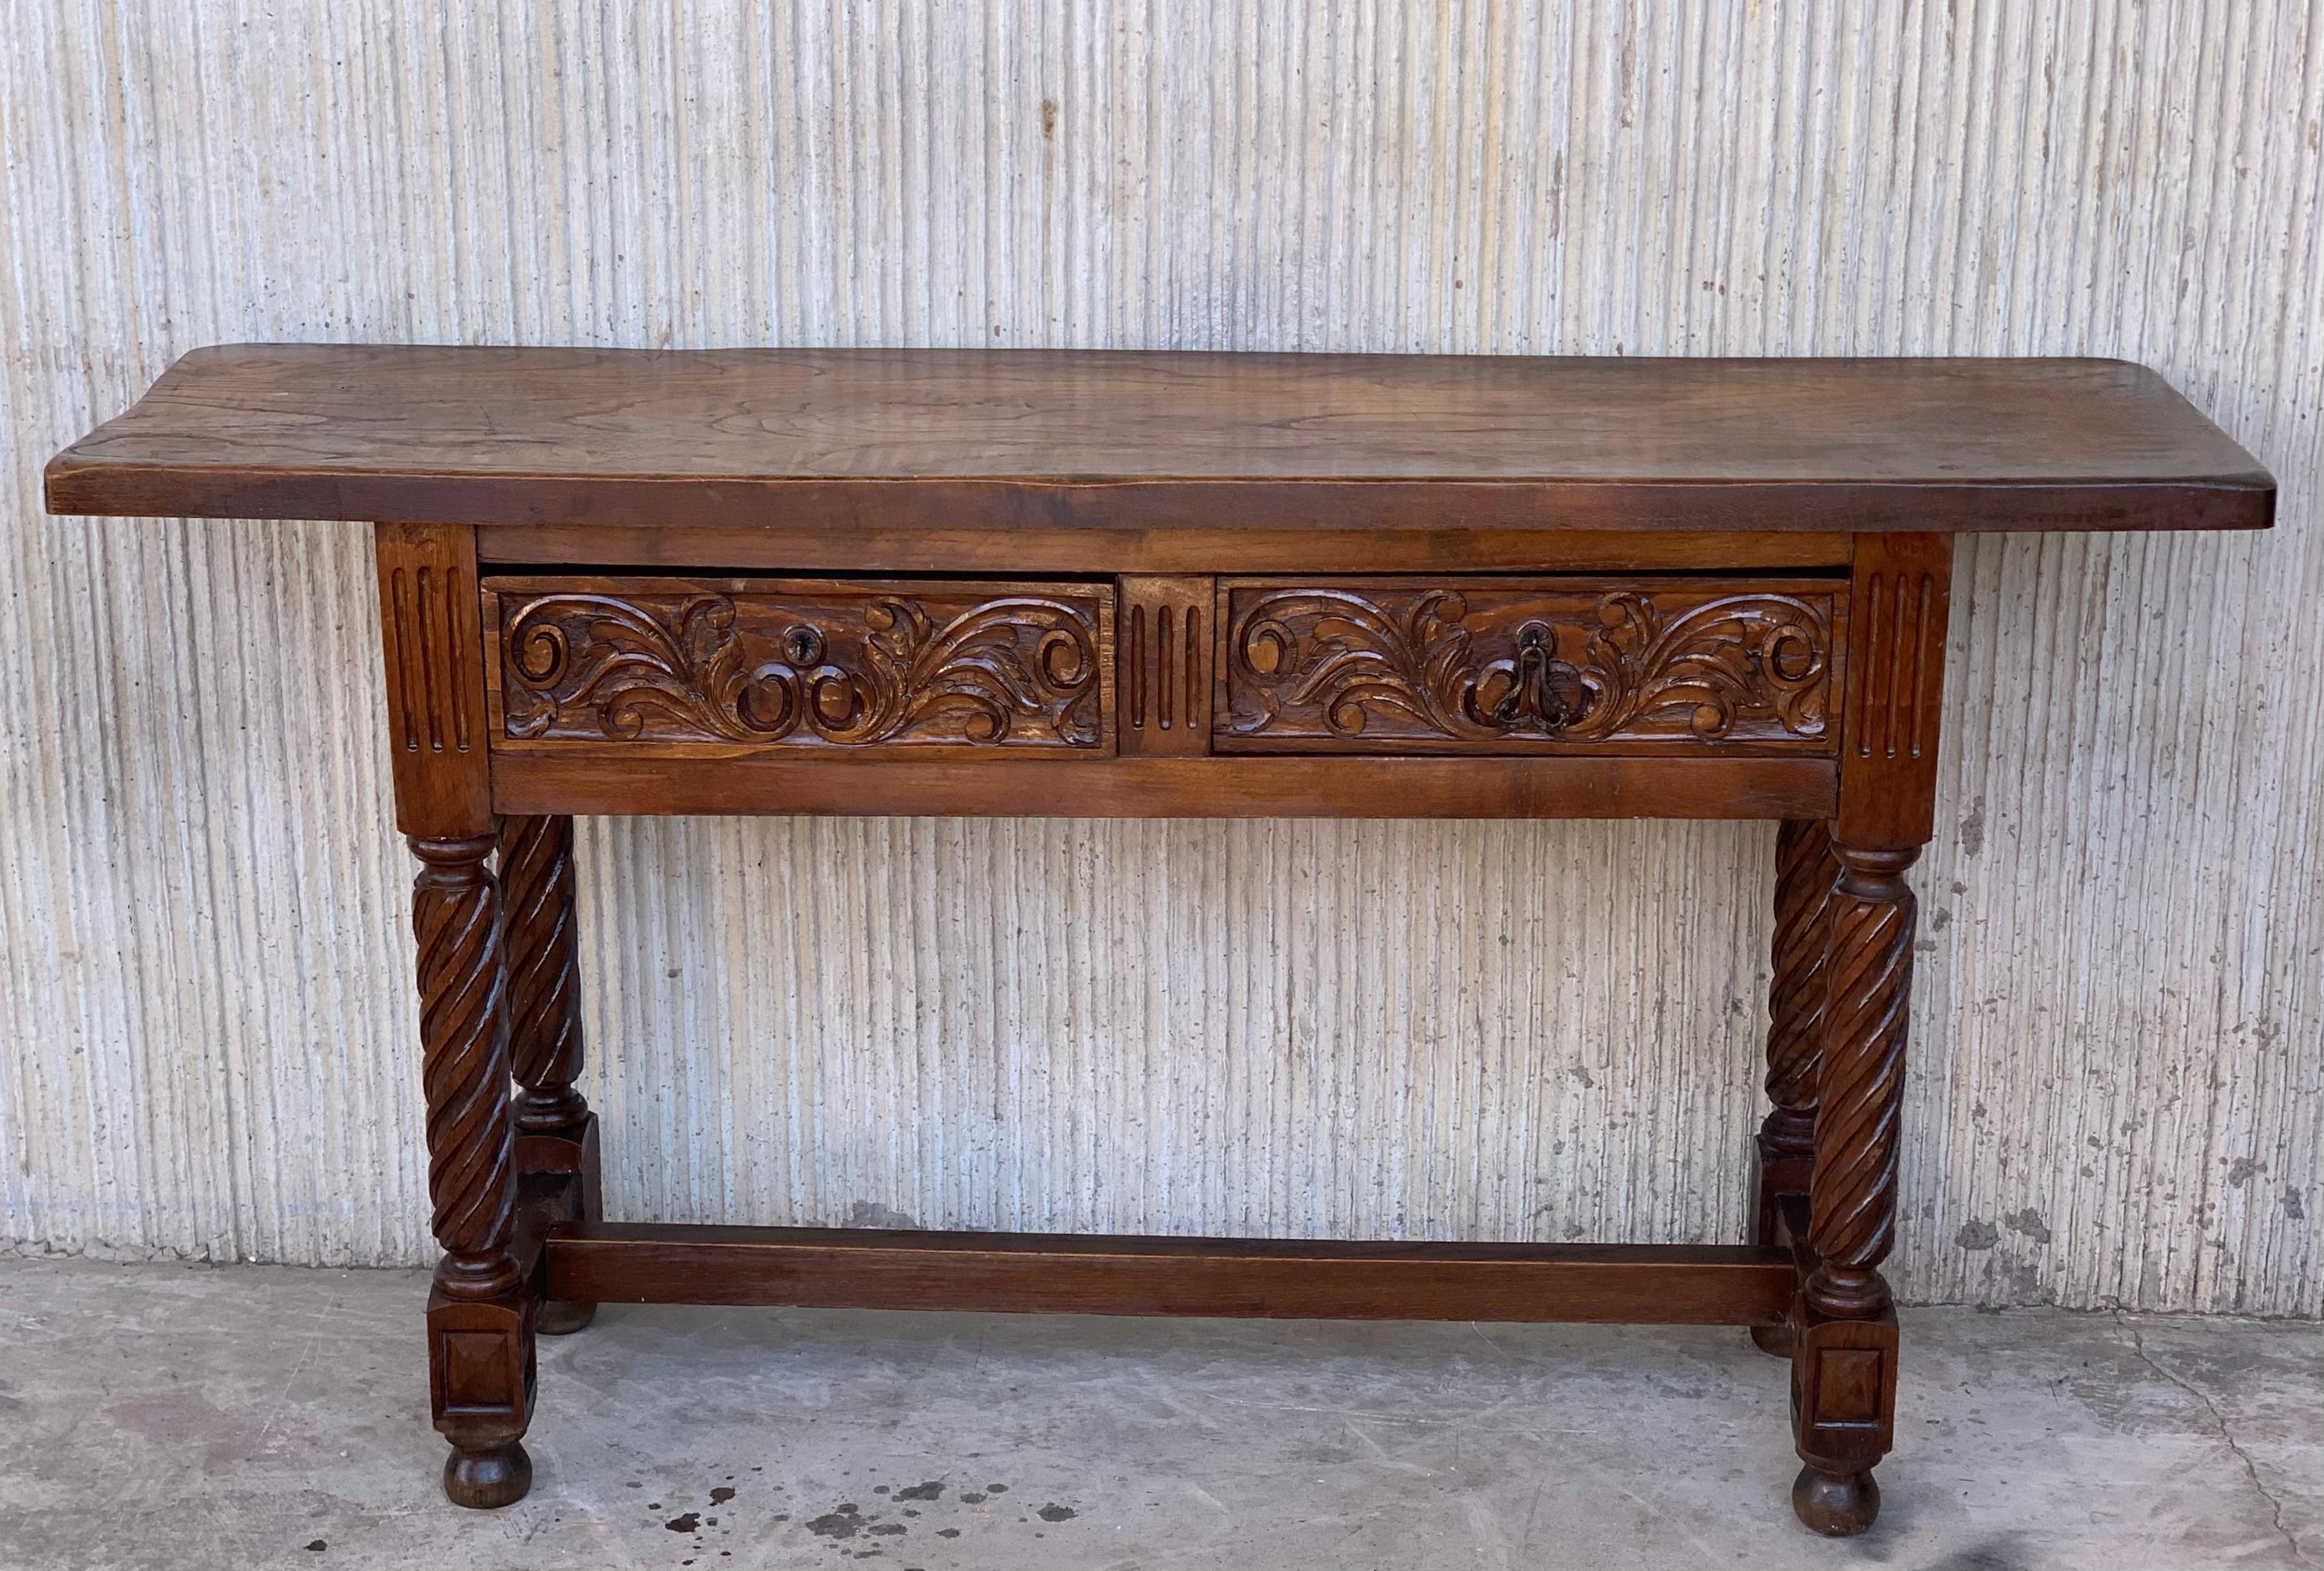 Baroque Early 19th Century Carved Walnut Wood Catalan Spanish Console Table